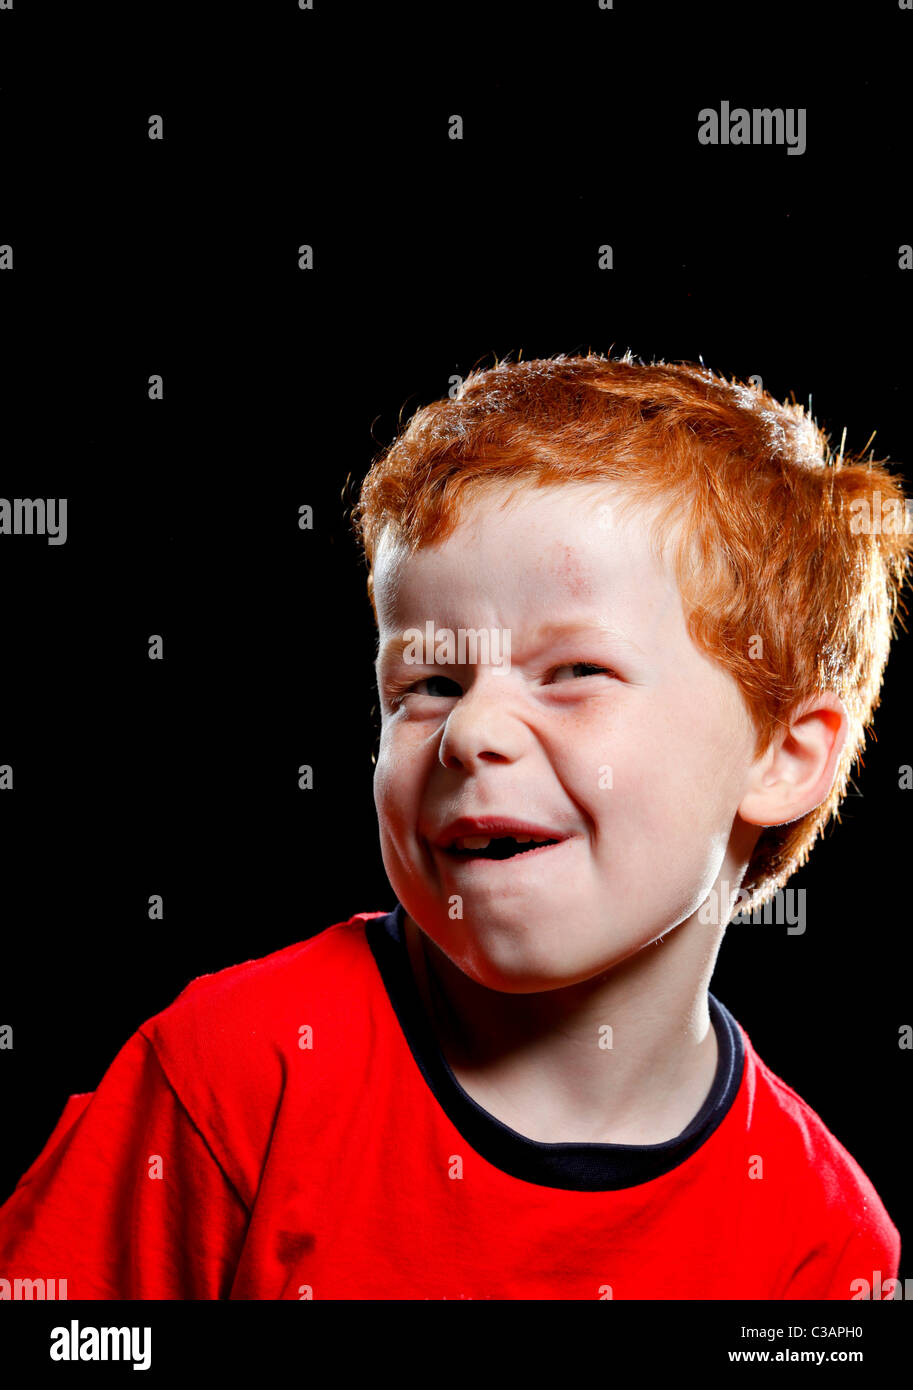 A seven year old boy pulling a funny face towards the camera. Stock Photo